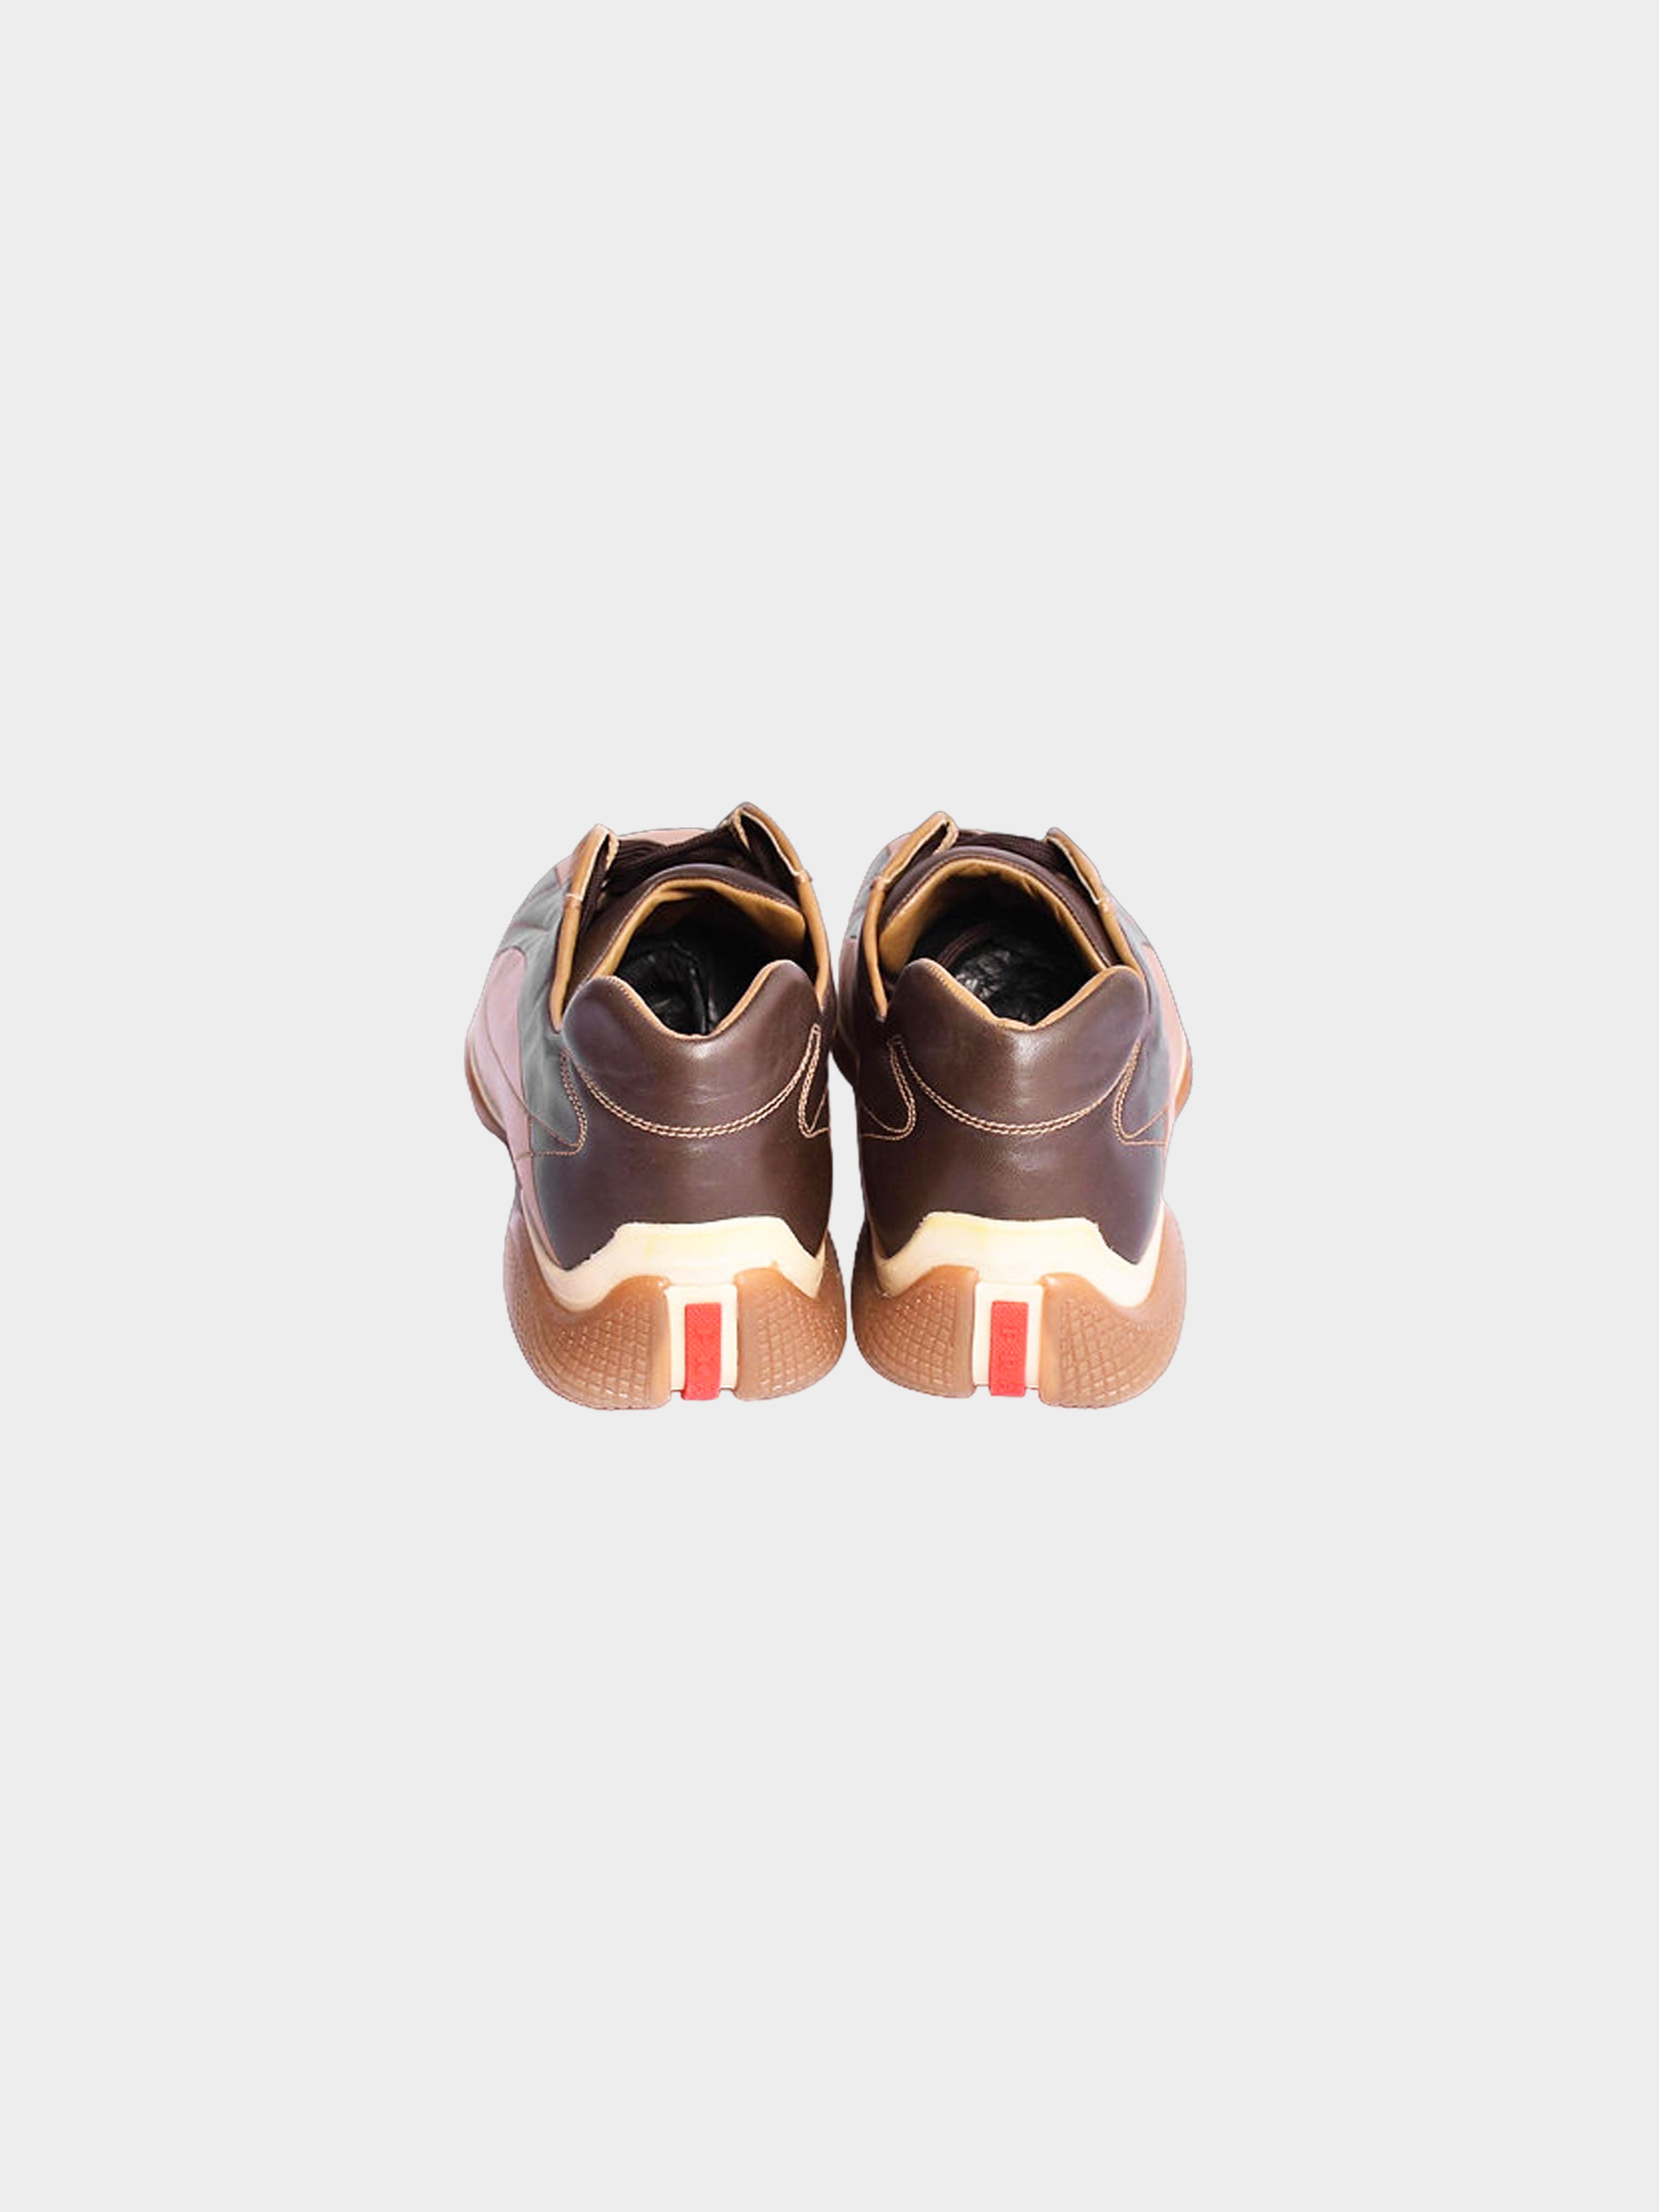 Prada Sport 2001 Brown and Nude Leather Sneakers